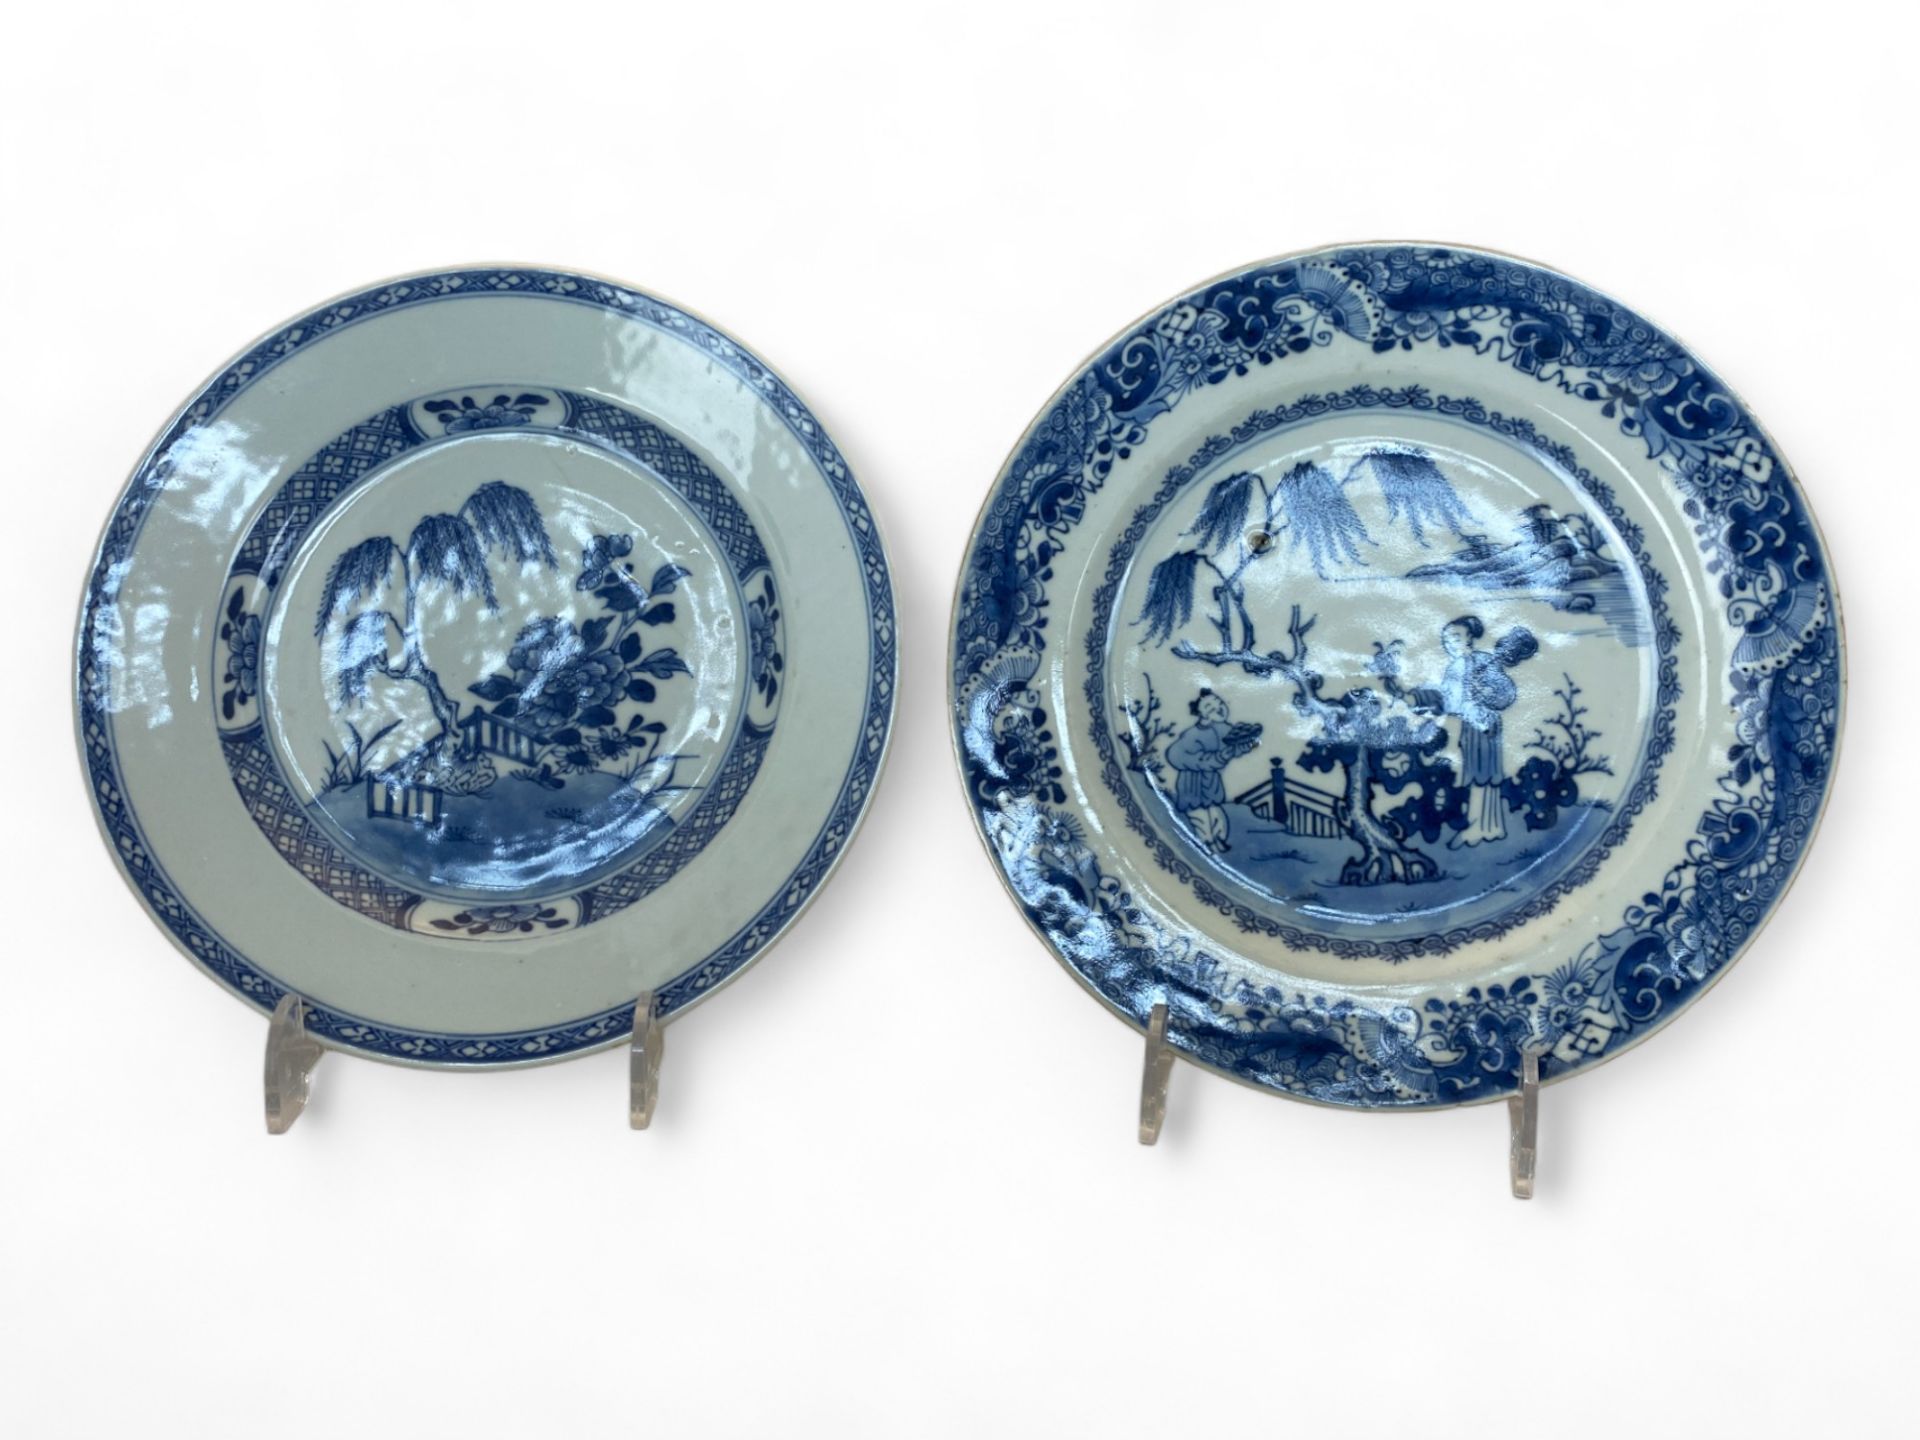 A 19th century Chinese blue and white peony pattern plate and a 19th century Chinese willow pattern